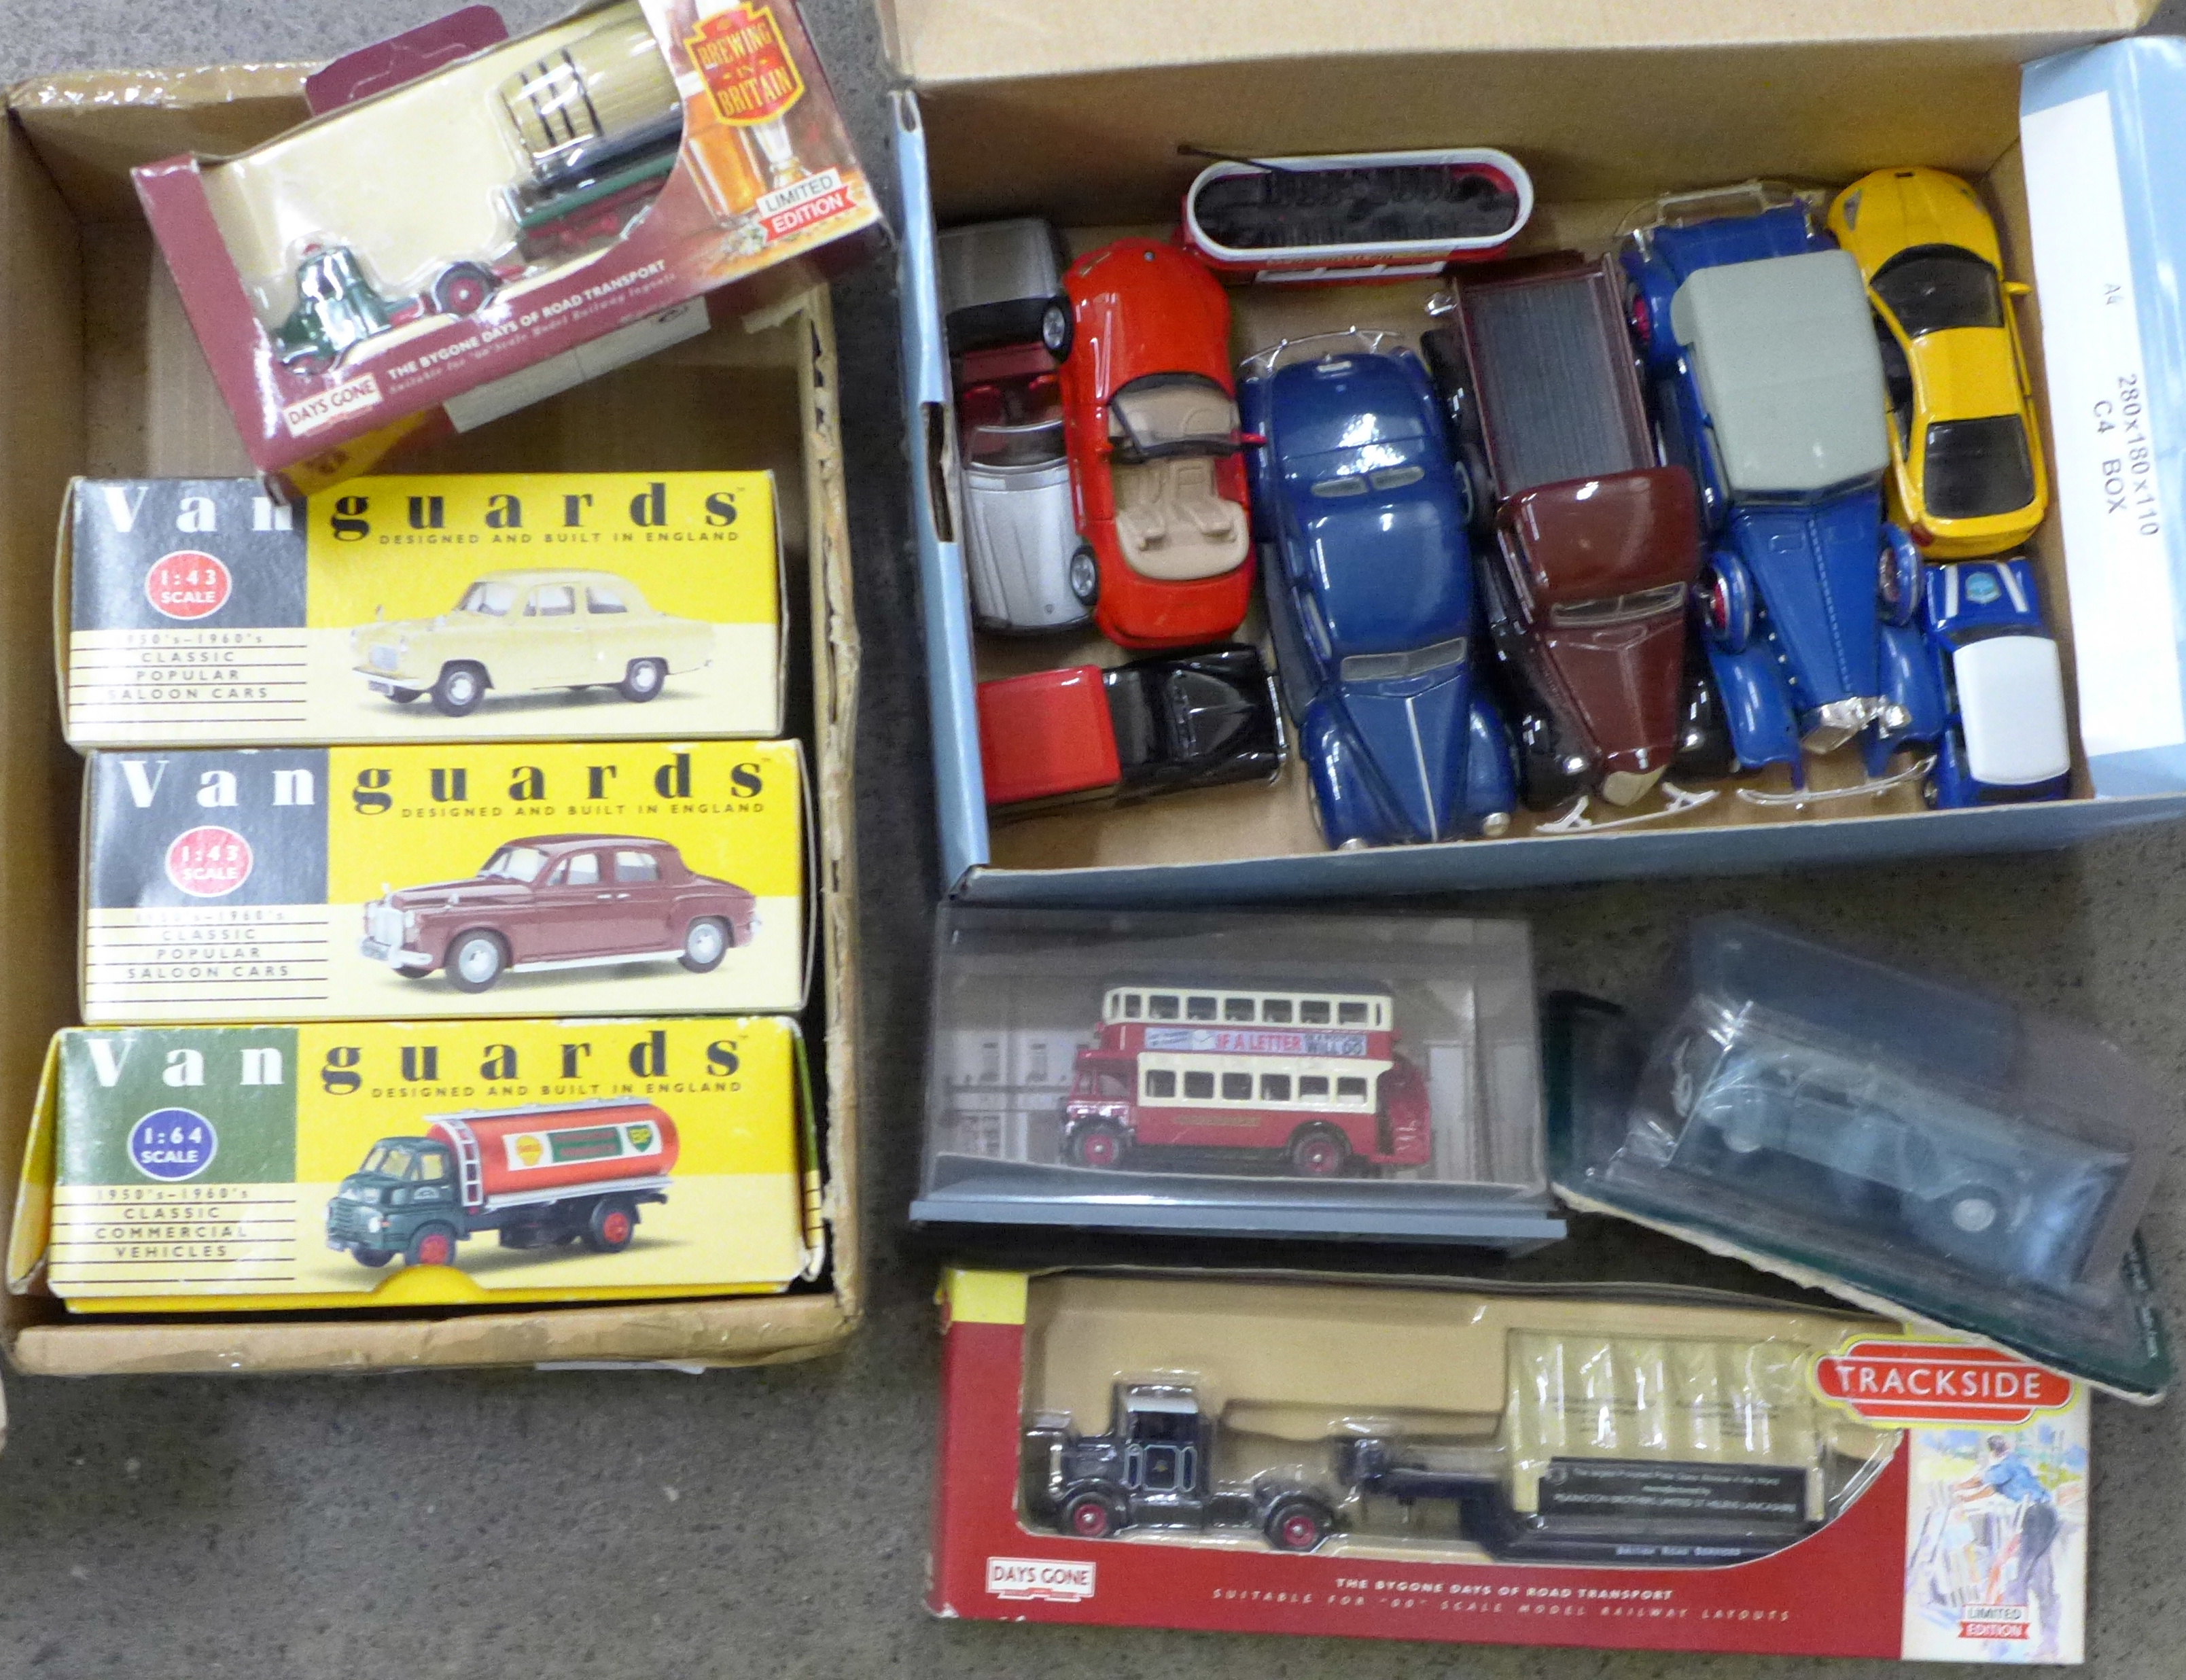 Three Vanguards, Days Gone Trackside and other die-cast model vehicles, seven boxed